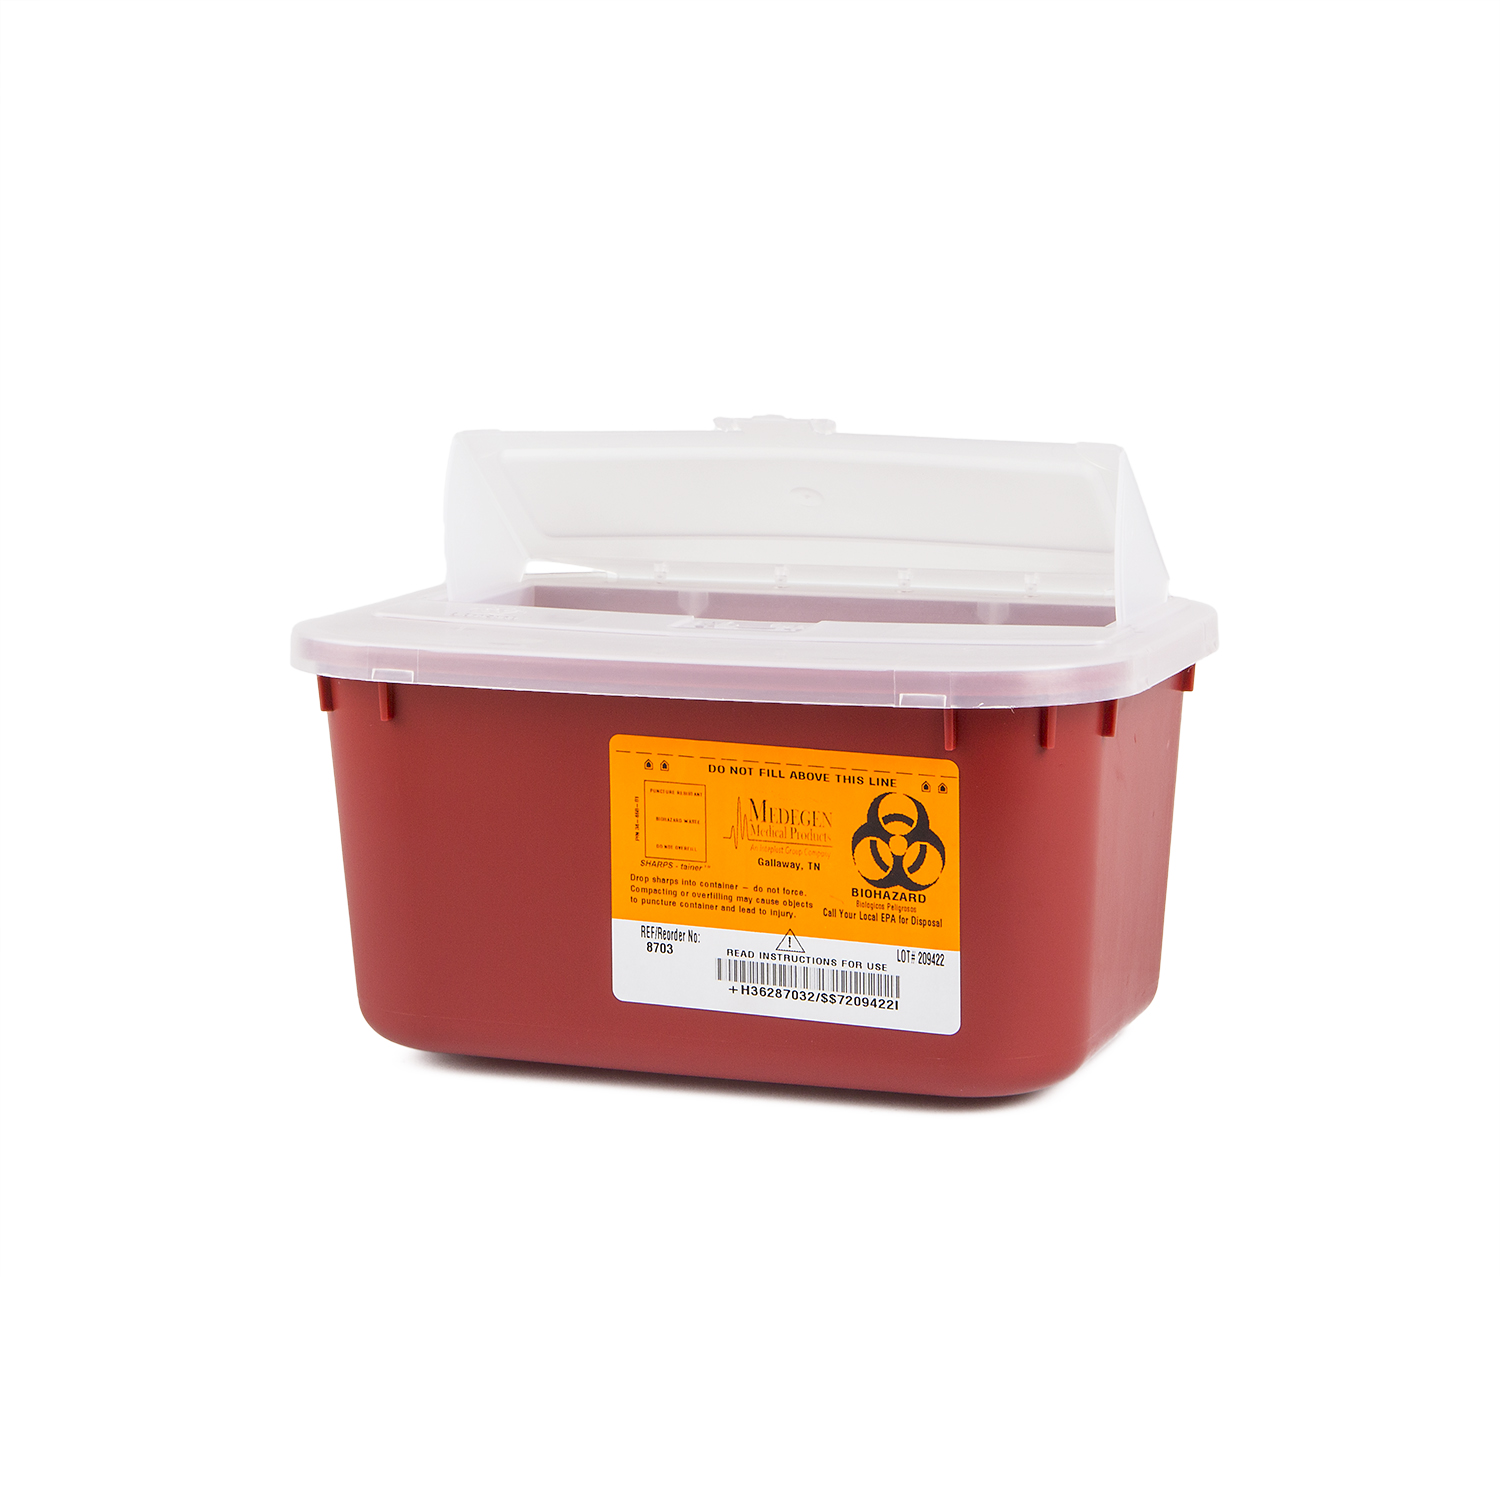 1 Gal Sharps Containers Products, Supplies and Equipment